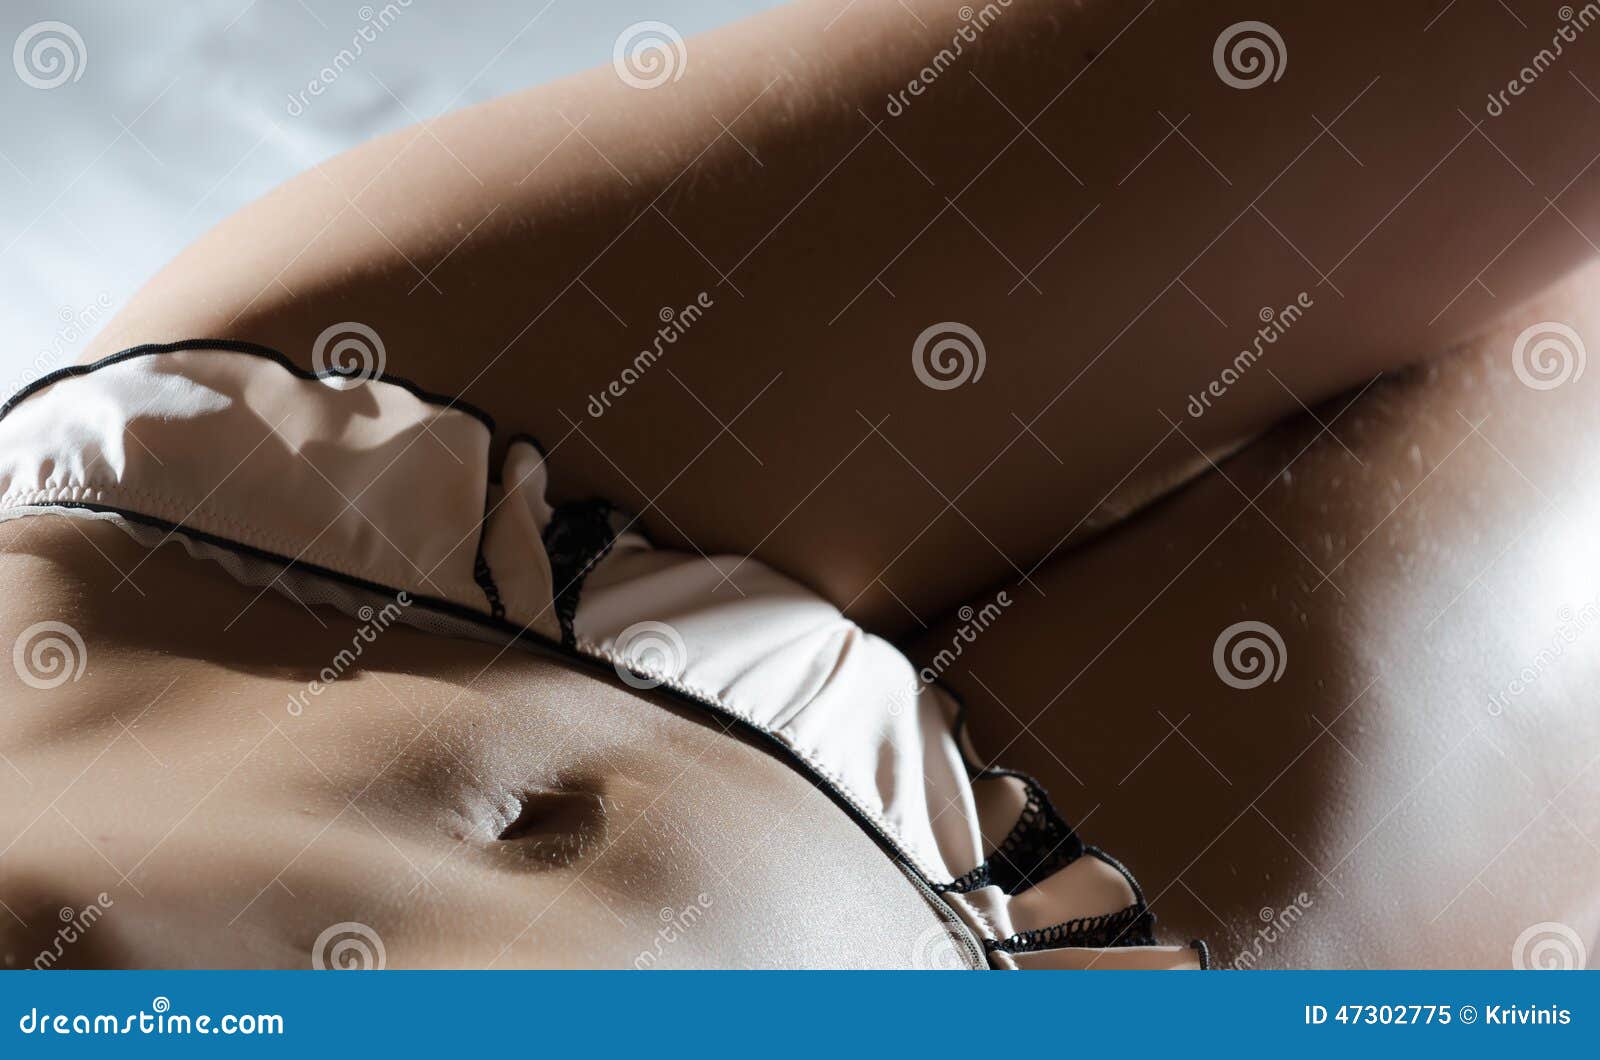 Parts of the body of woman stock image. Image of fresh - 47302775